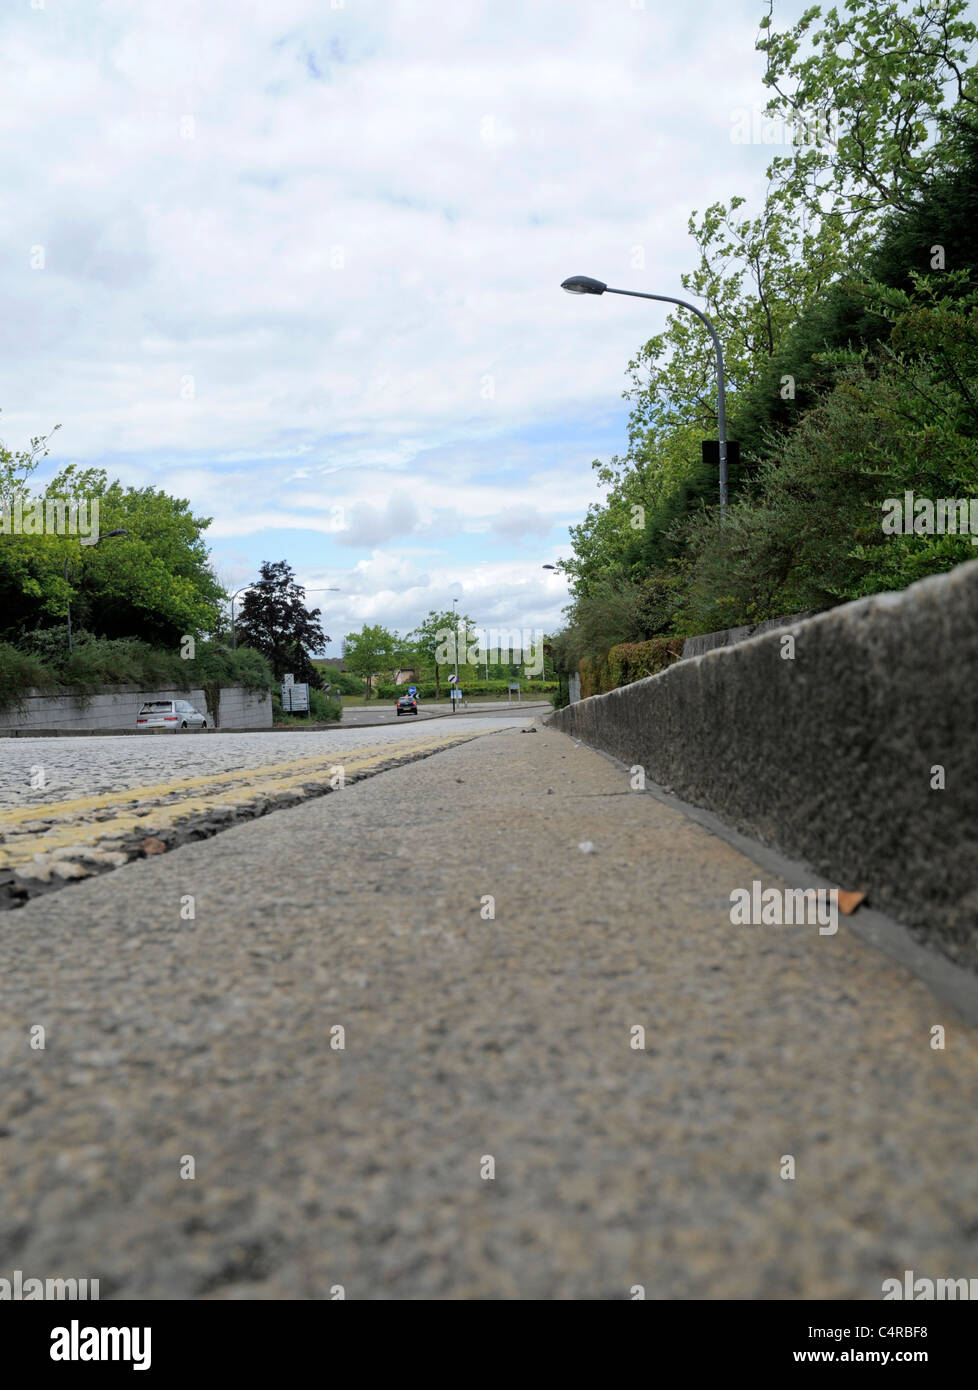 Low Level Angle Looking Down Pavement or Sidewalk Curb at Edge of Road Stock Photo